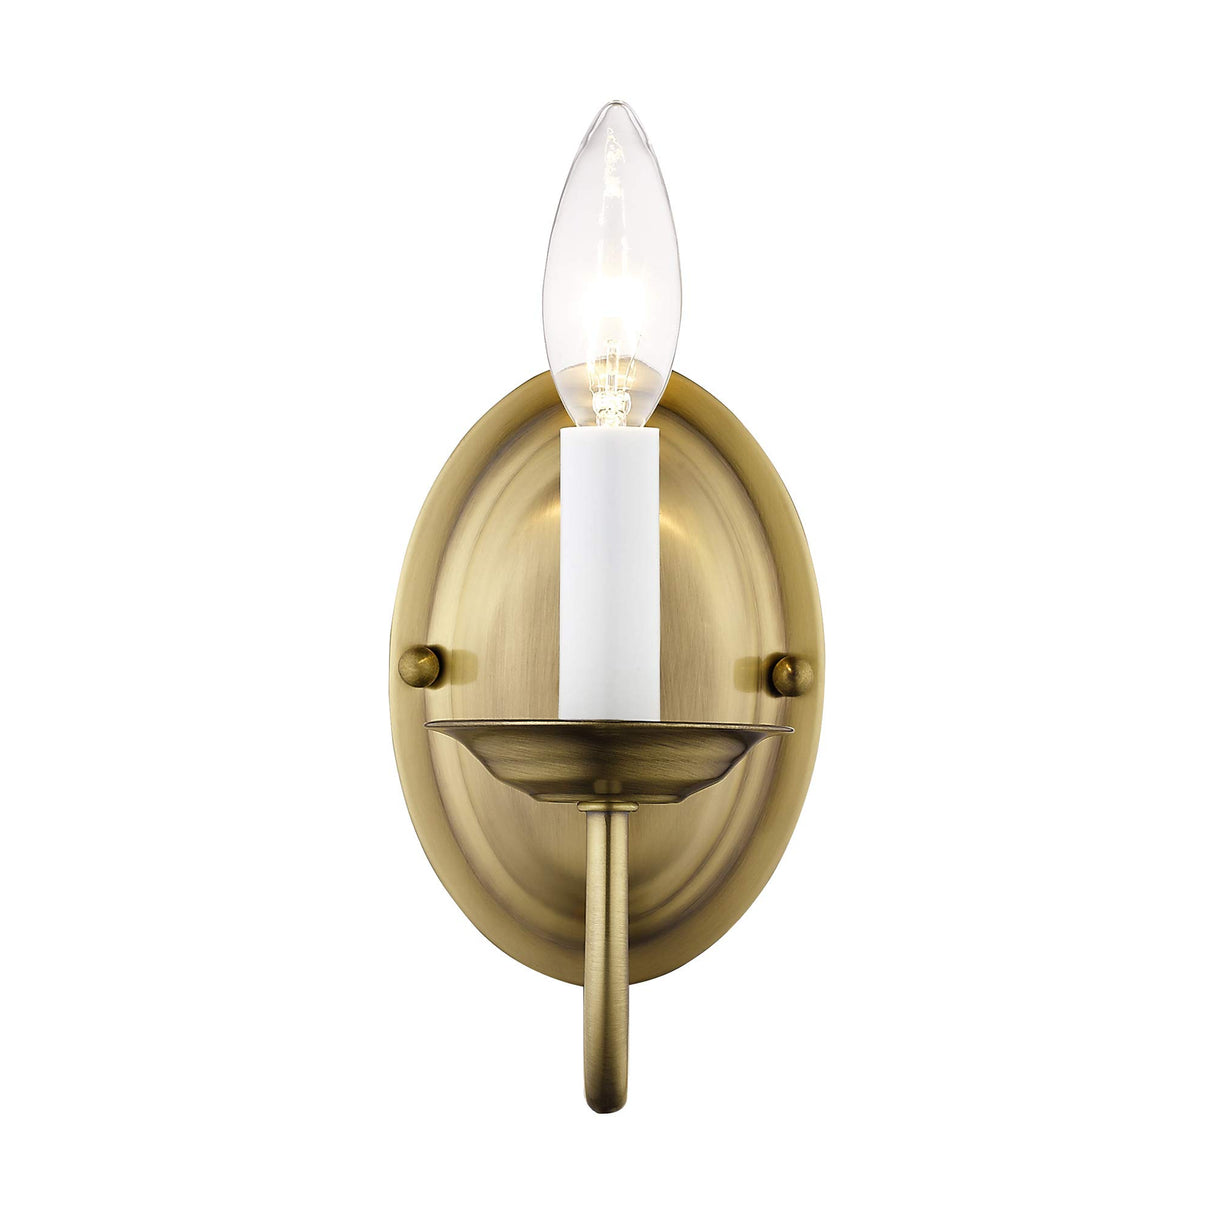 Livex Lighting 4151-01 Wall Sconce with No Shades, Antique Brass, 4.25"W x 7"H